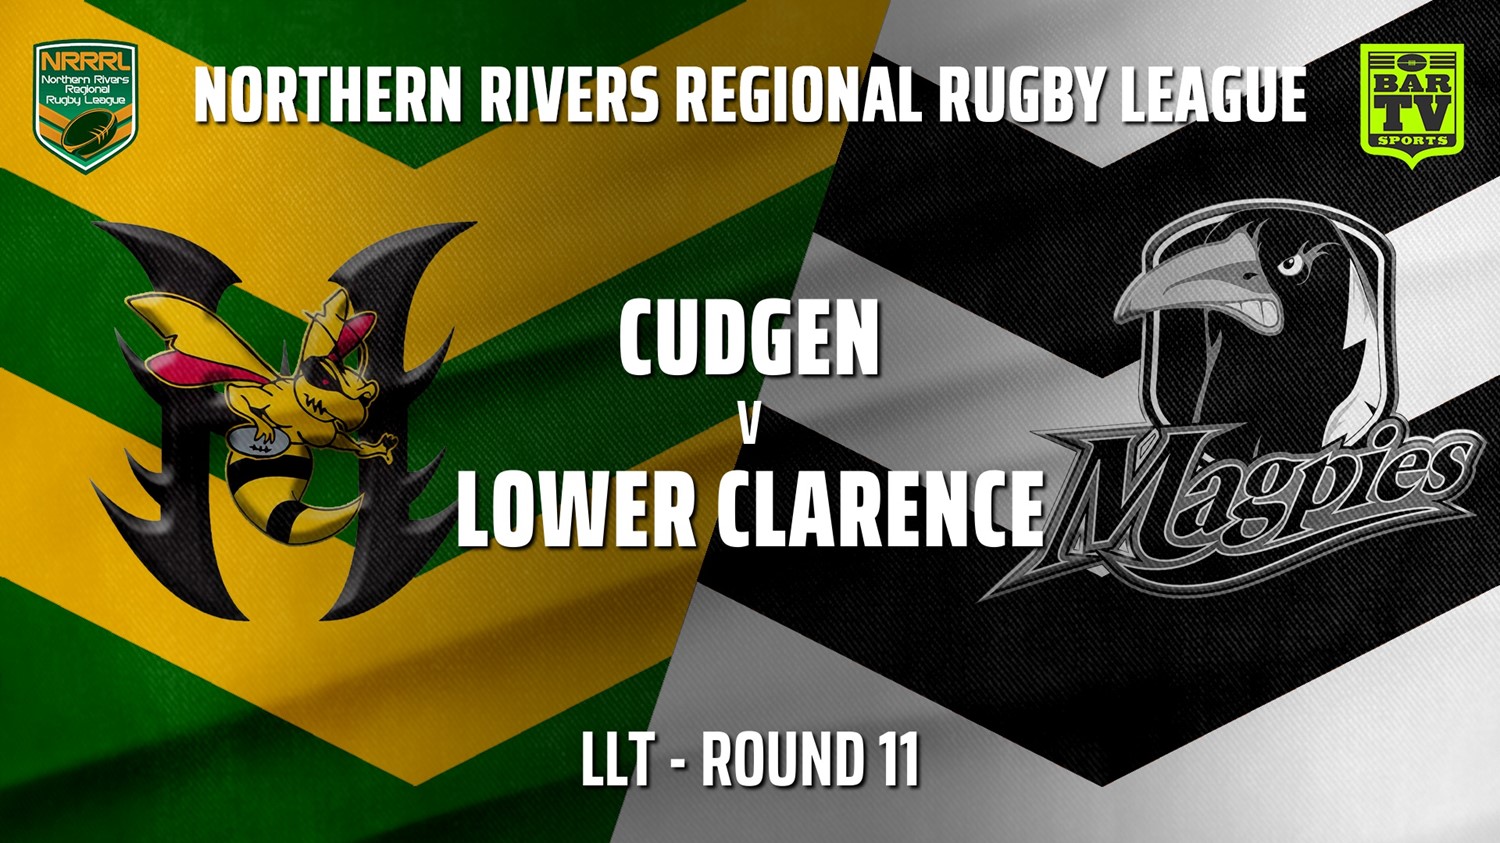 210718-Northern Rivers Round 11 - LLT - Cudgen Hornets v Lower Clarence Magpies Slate Image